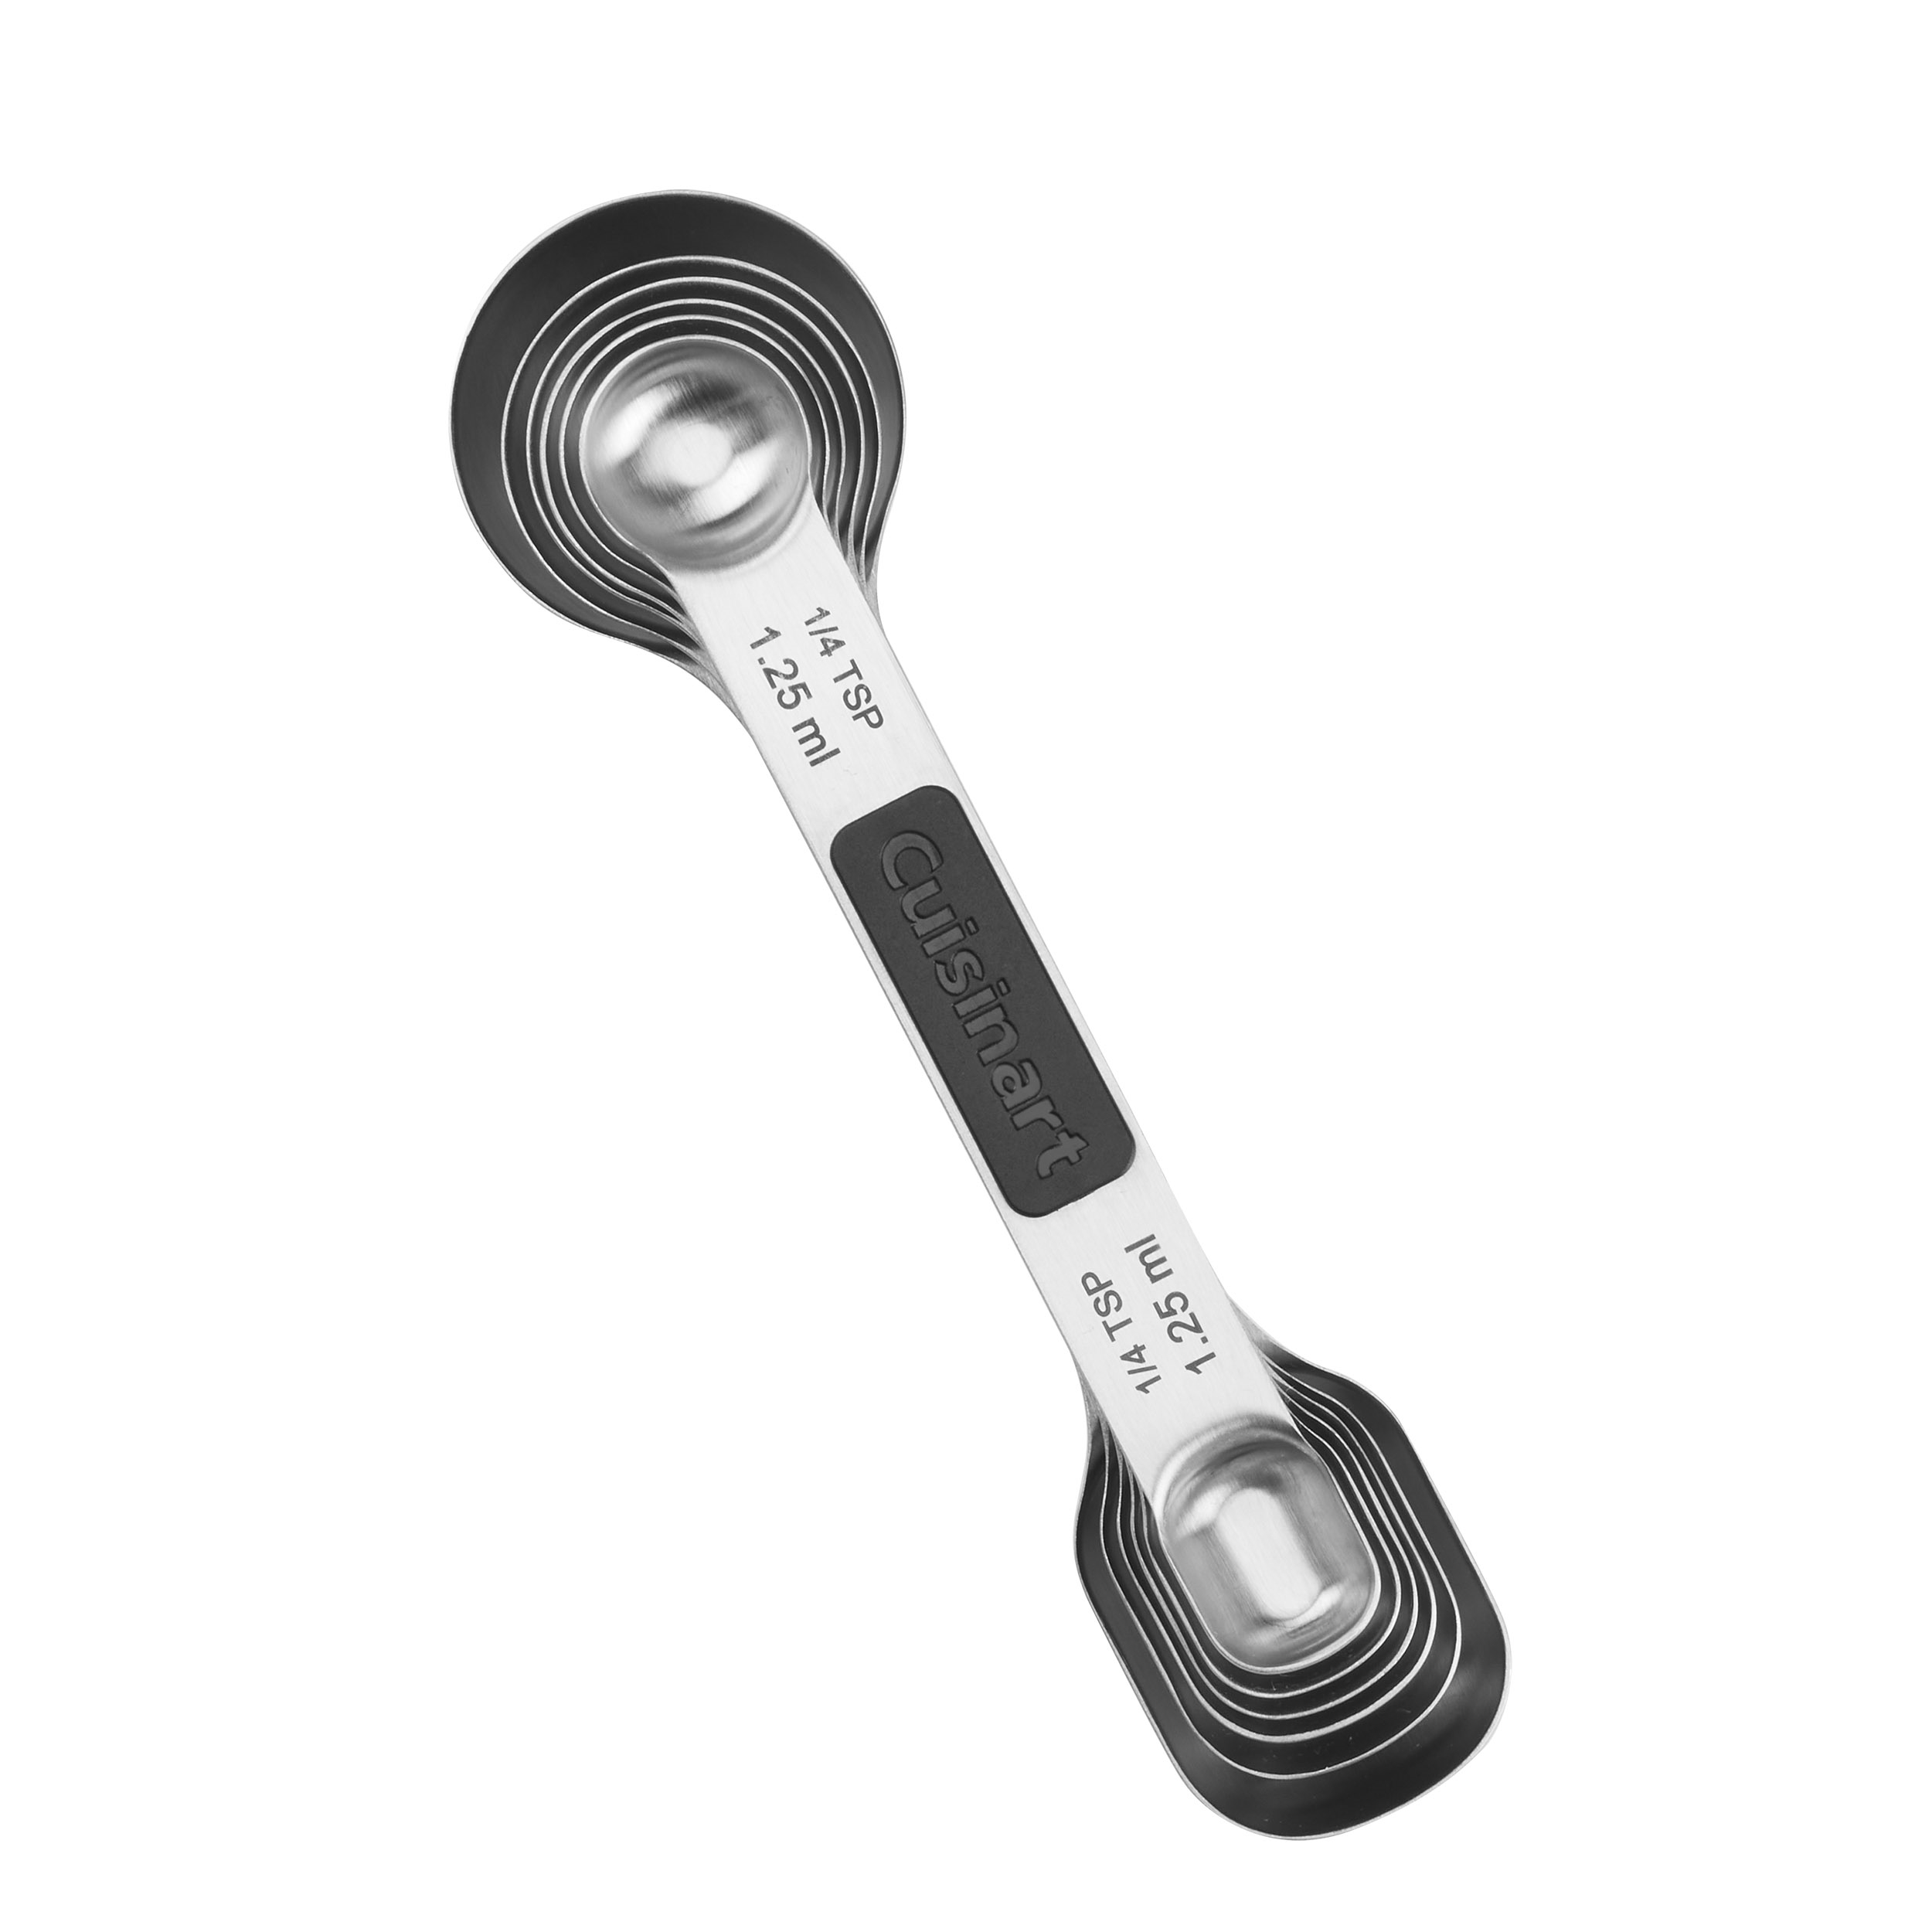 Favorite Kitchen Things - Magnetized Measuring Spoons by